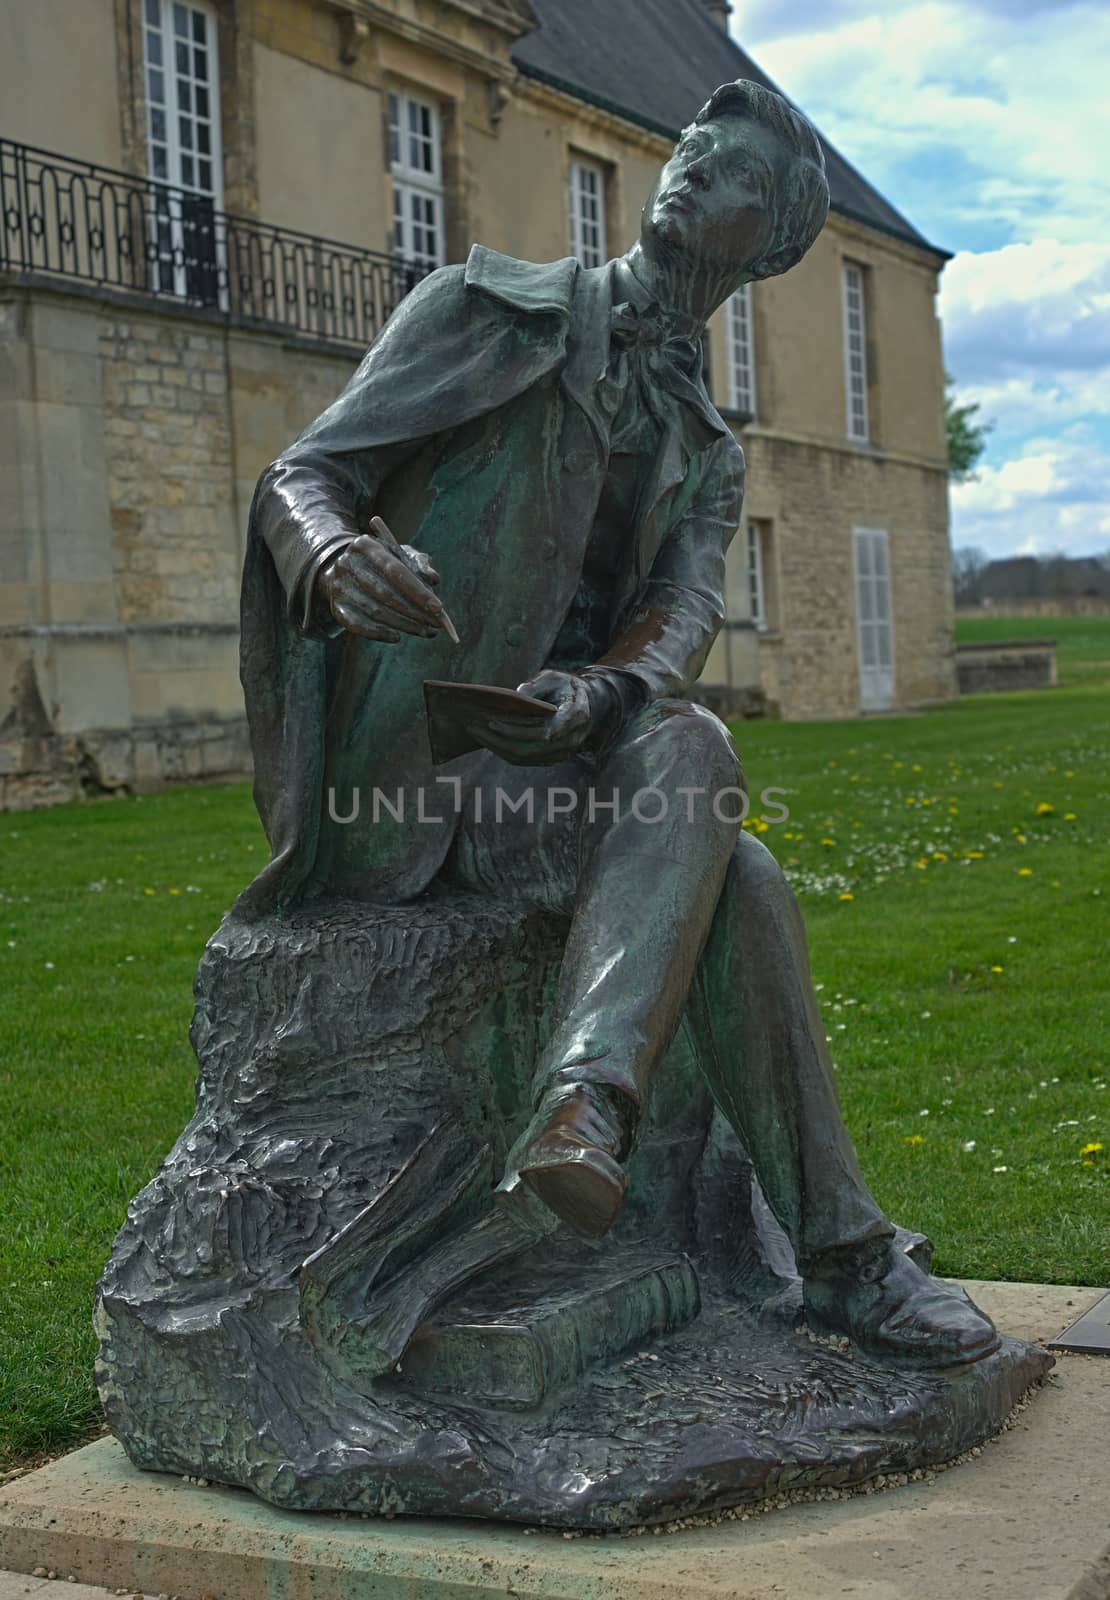 Sculpture of a poet in front of an museum of Normandy in Caen, France by sheriffkule